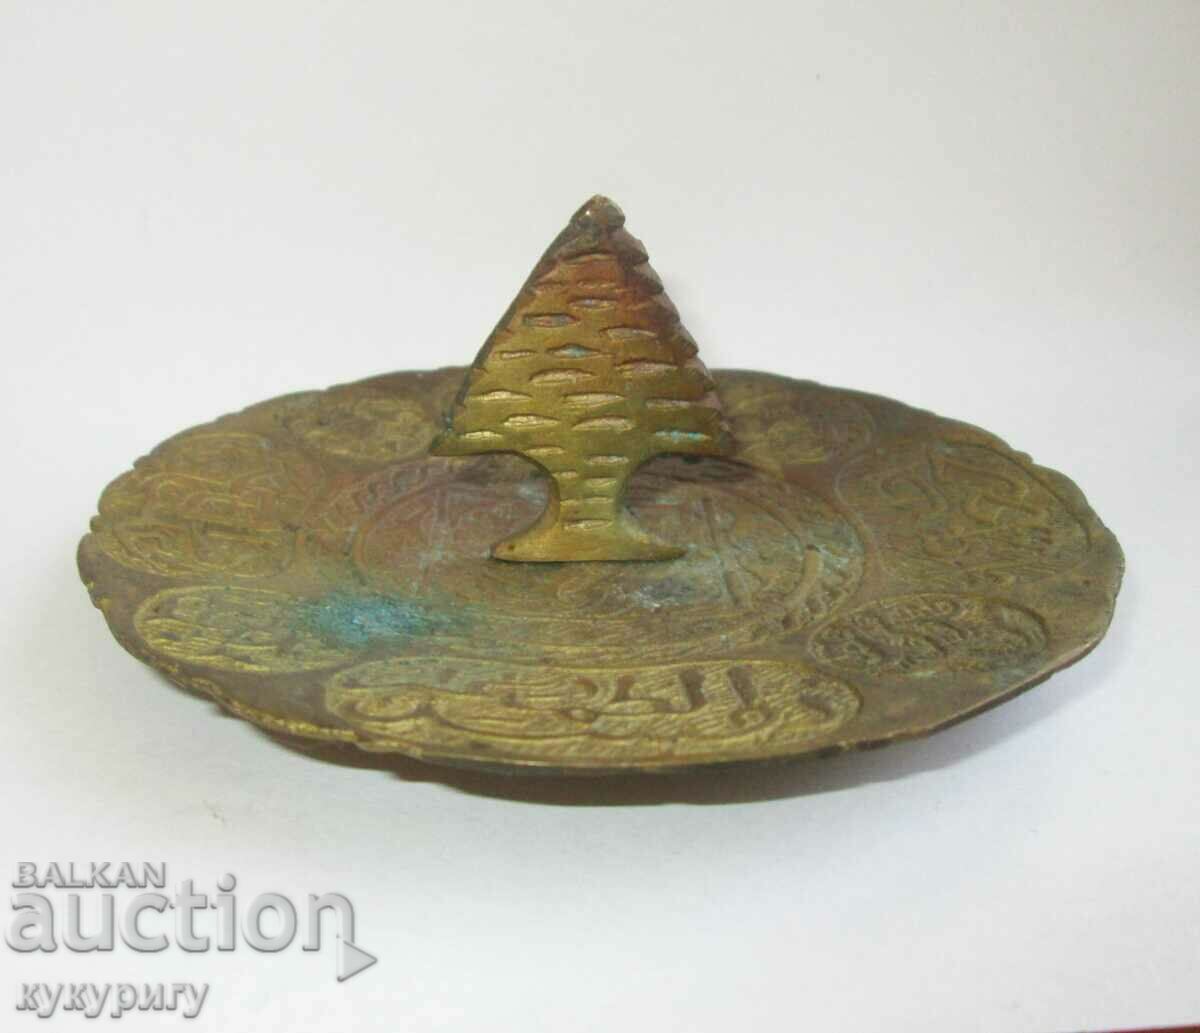 Old bronze plate saucer object with Arabic inscriptions